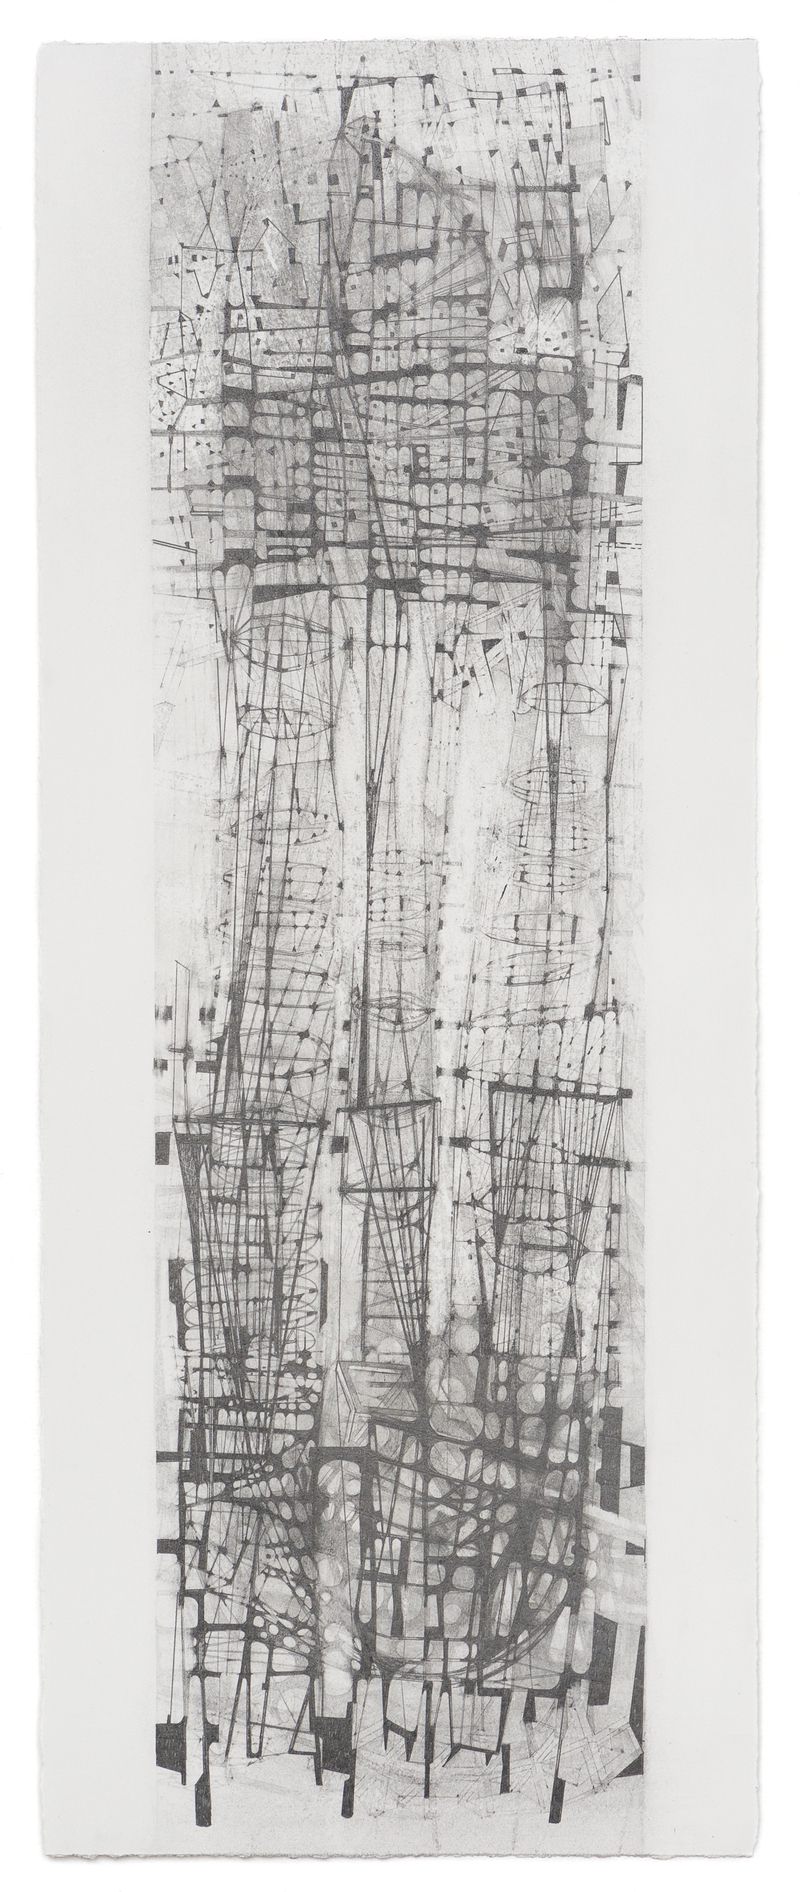 A graphite on paper drawing titled Urban Canyon by Stephen Talasnik.